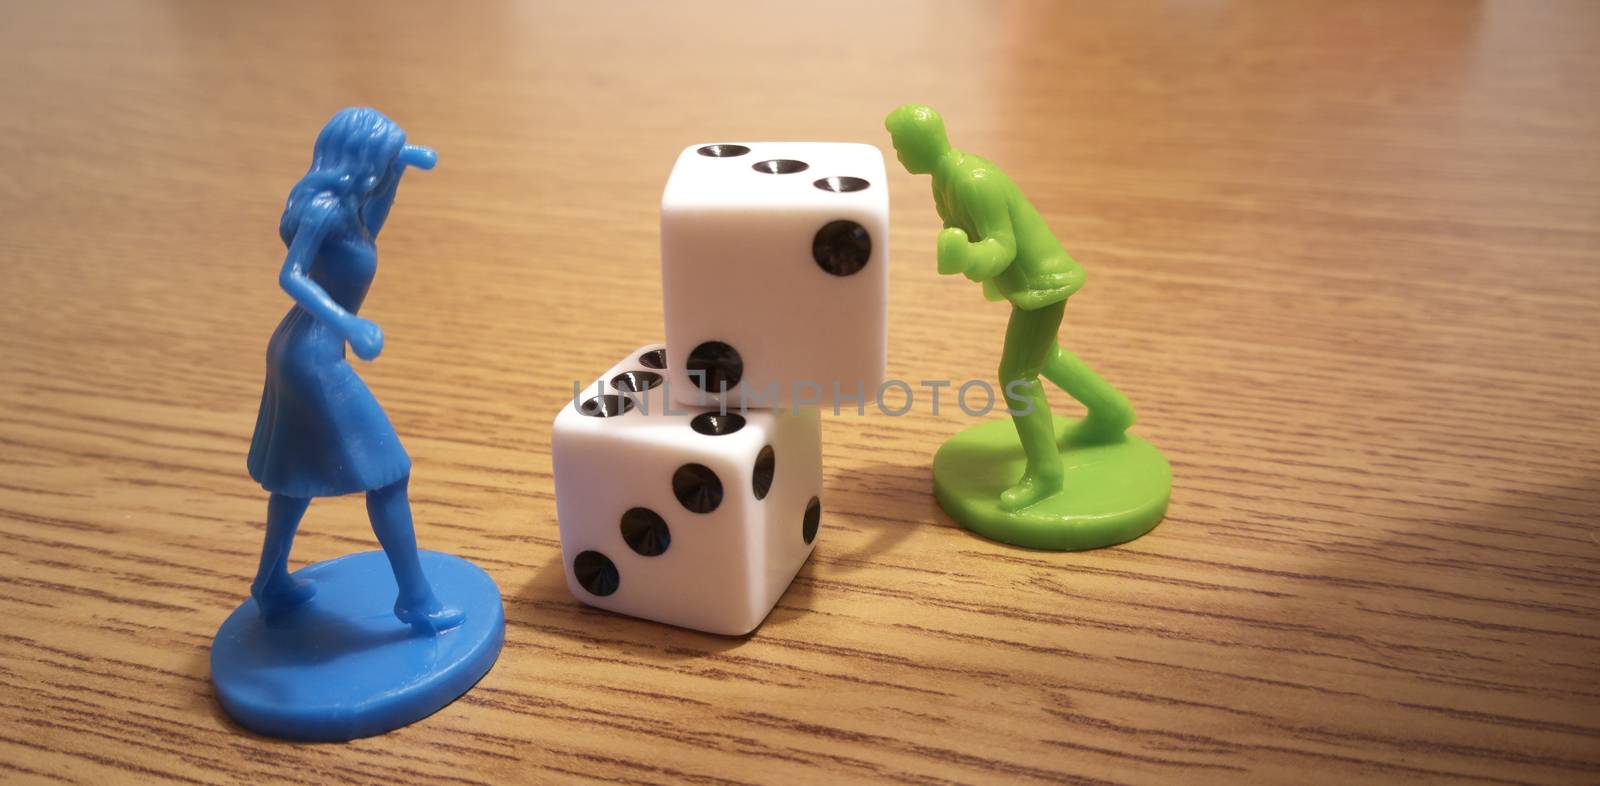 The dice and the game pieces by pippocarlot